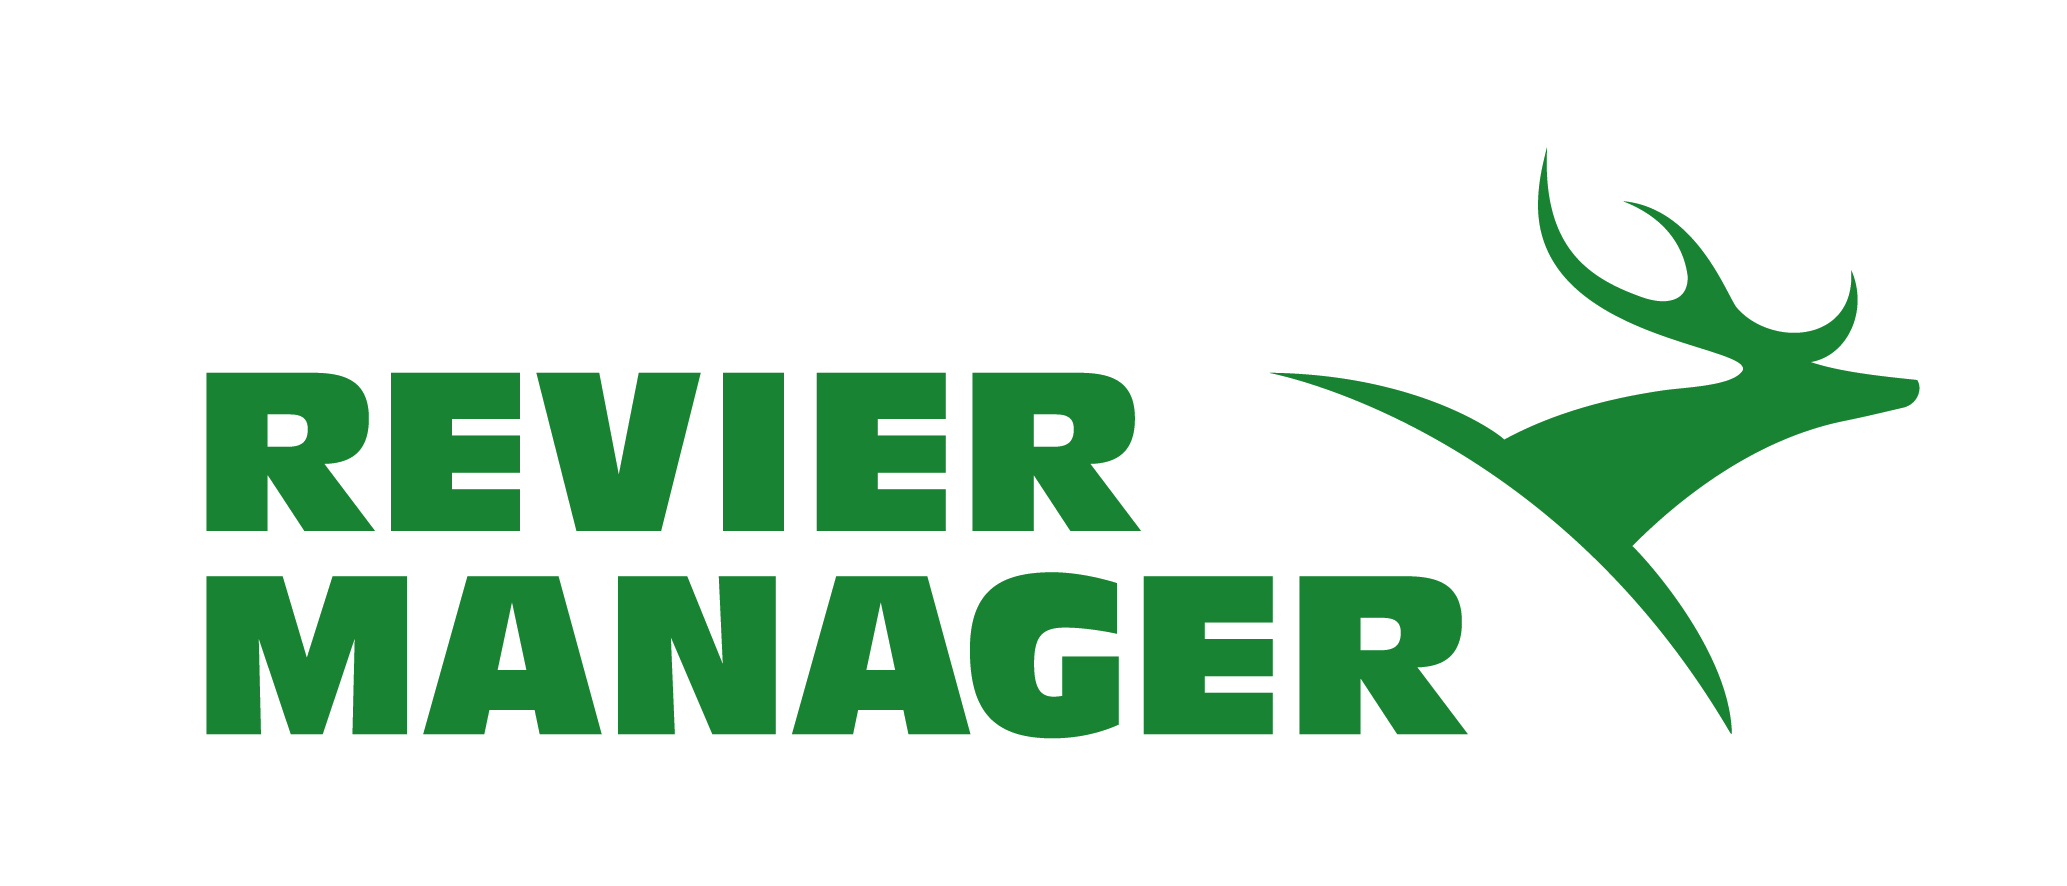 Reviermanager green